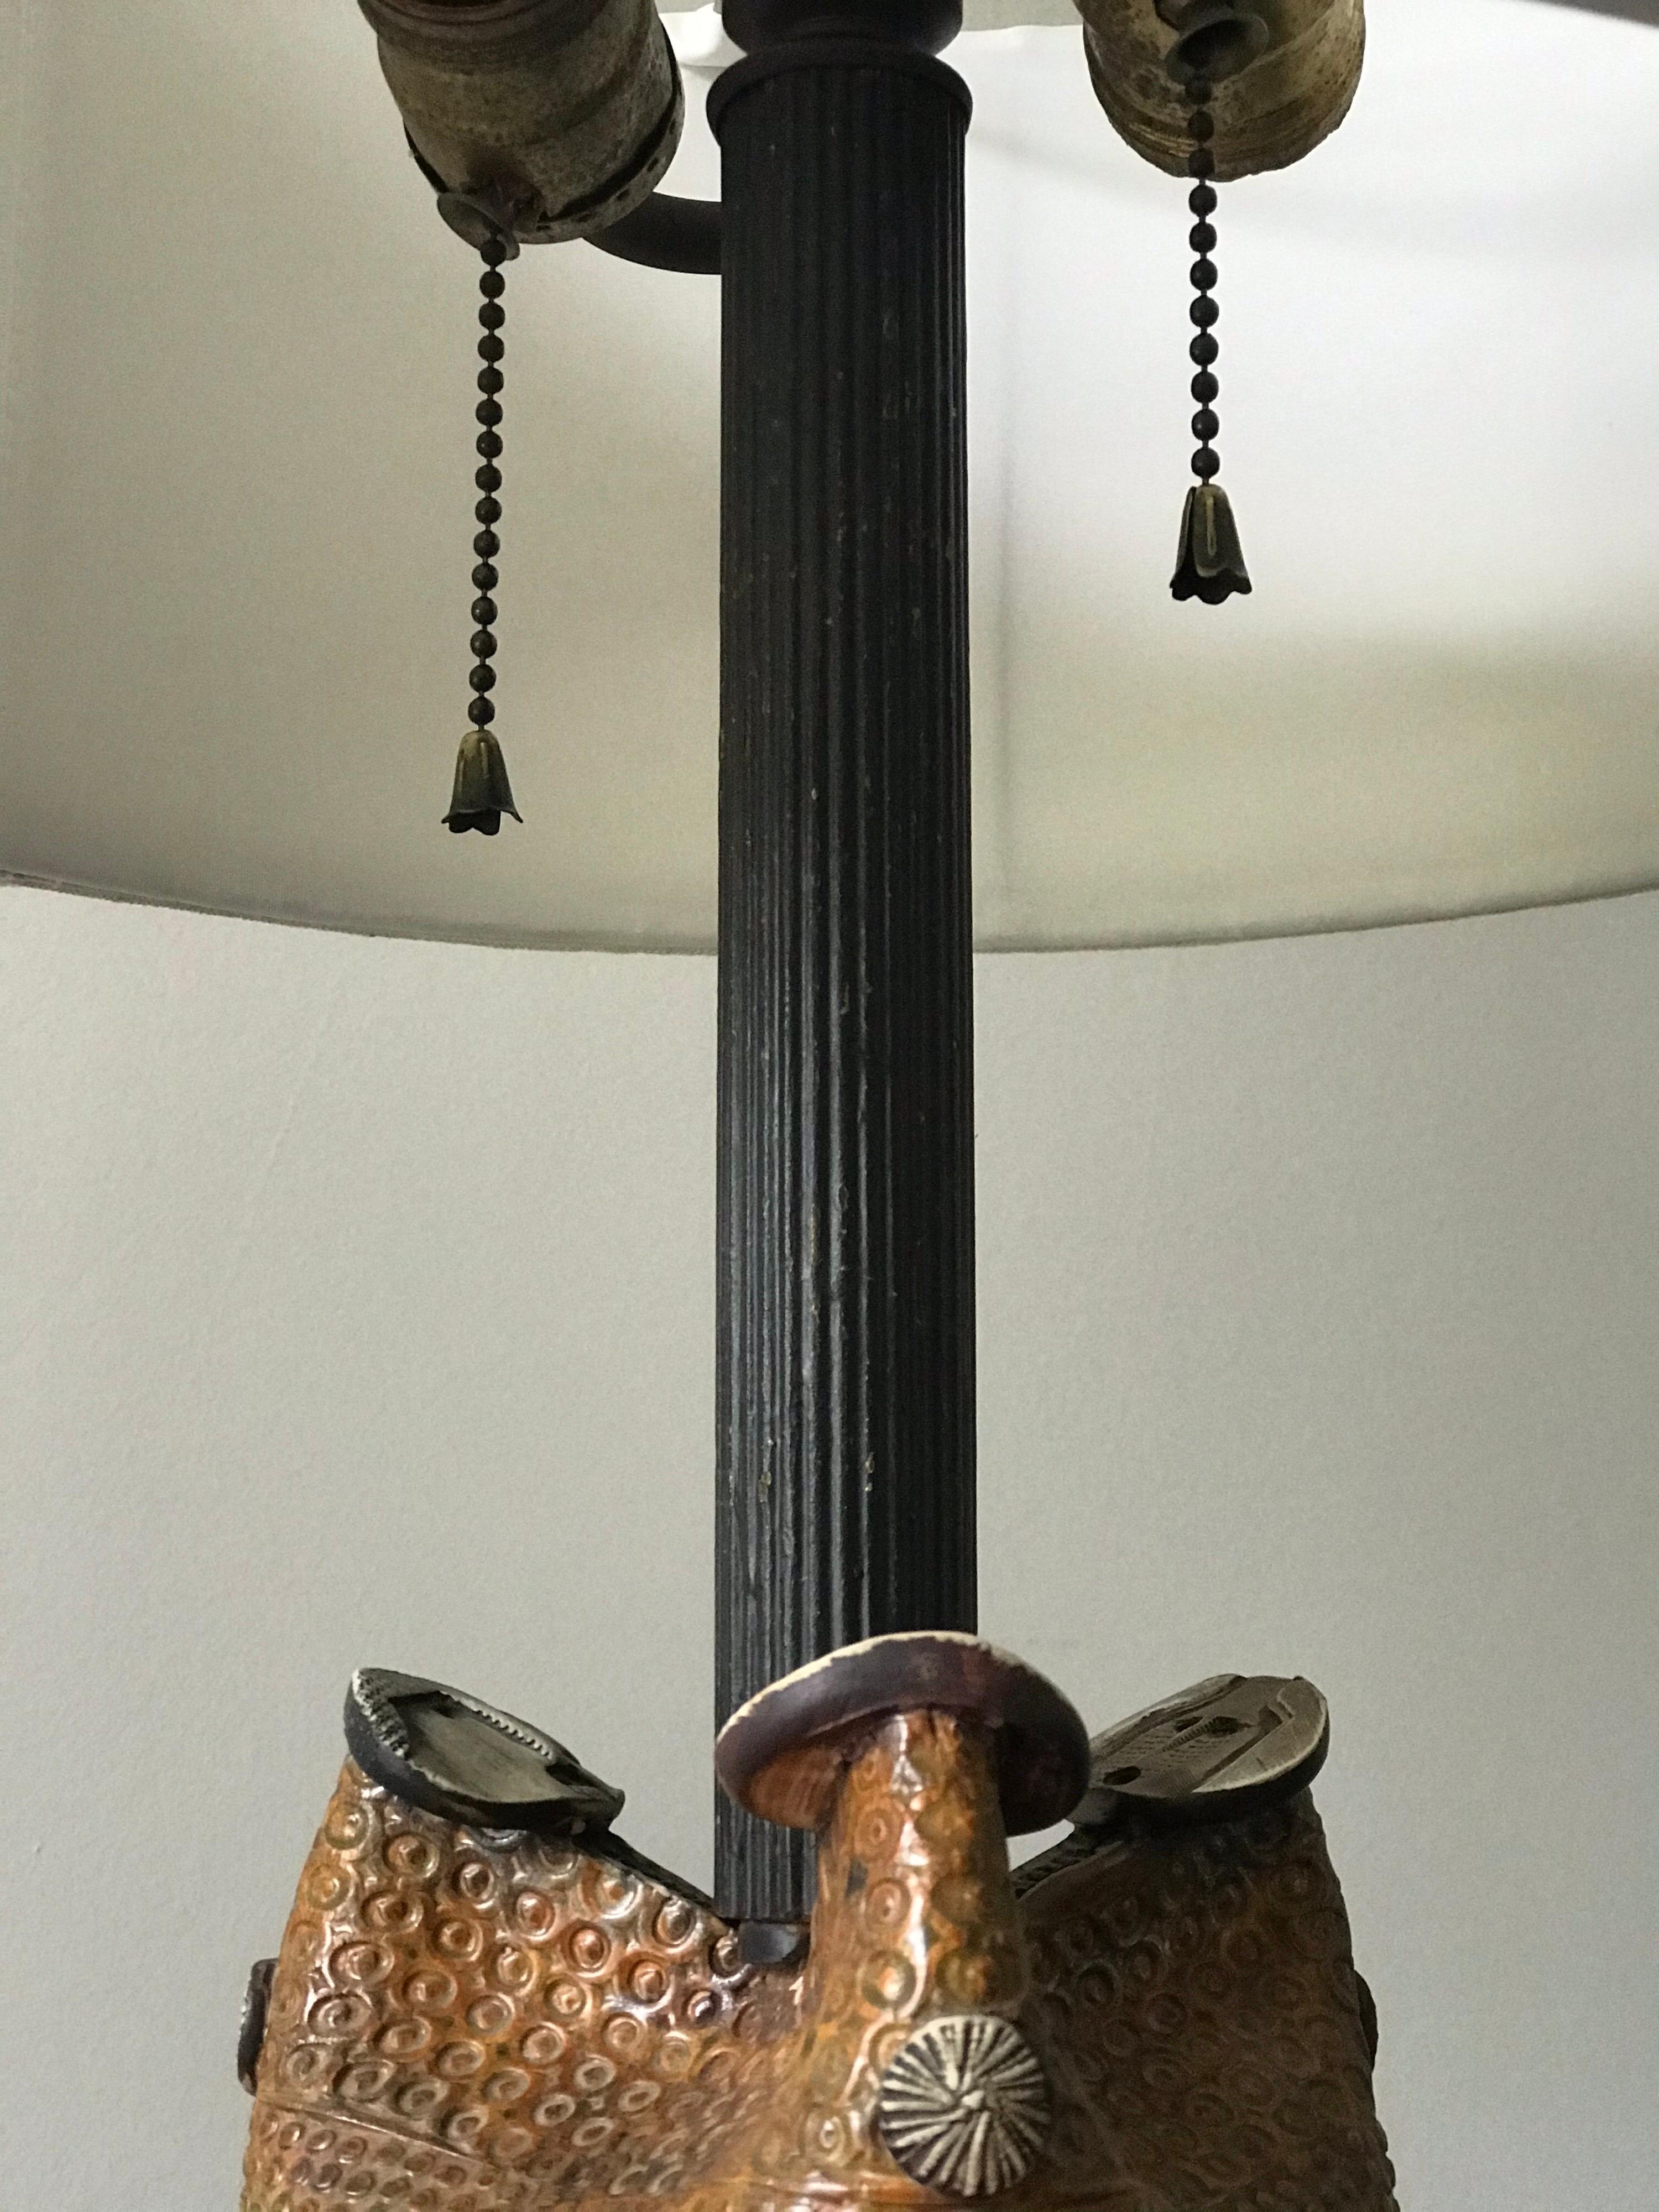 An unusual and large ceramic lamp by Bengt Berglund for Gustavsberg. Large ceramic base sits on a wood stand, with a long neck and double pull chain socket. Completely unique to the market. 

It's possible this was a ceramic sculpture that was